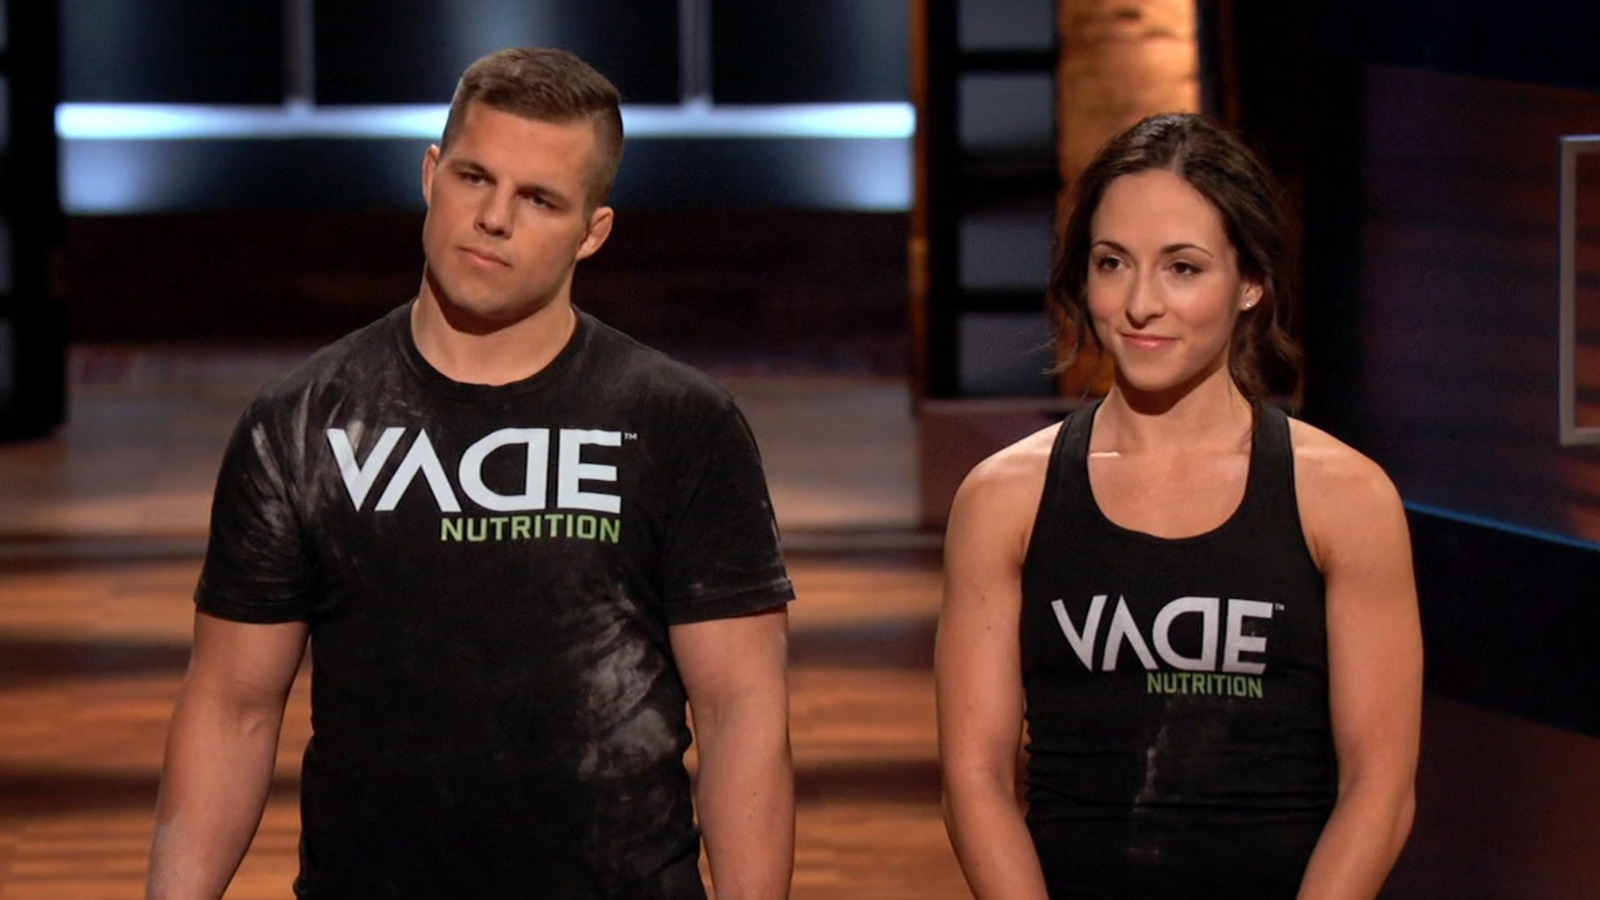 https://www.looper.com/img/gallery/whatever-happened-to-vade-nutrition-after-shark-tank/l-intro-1698729864.jpg